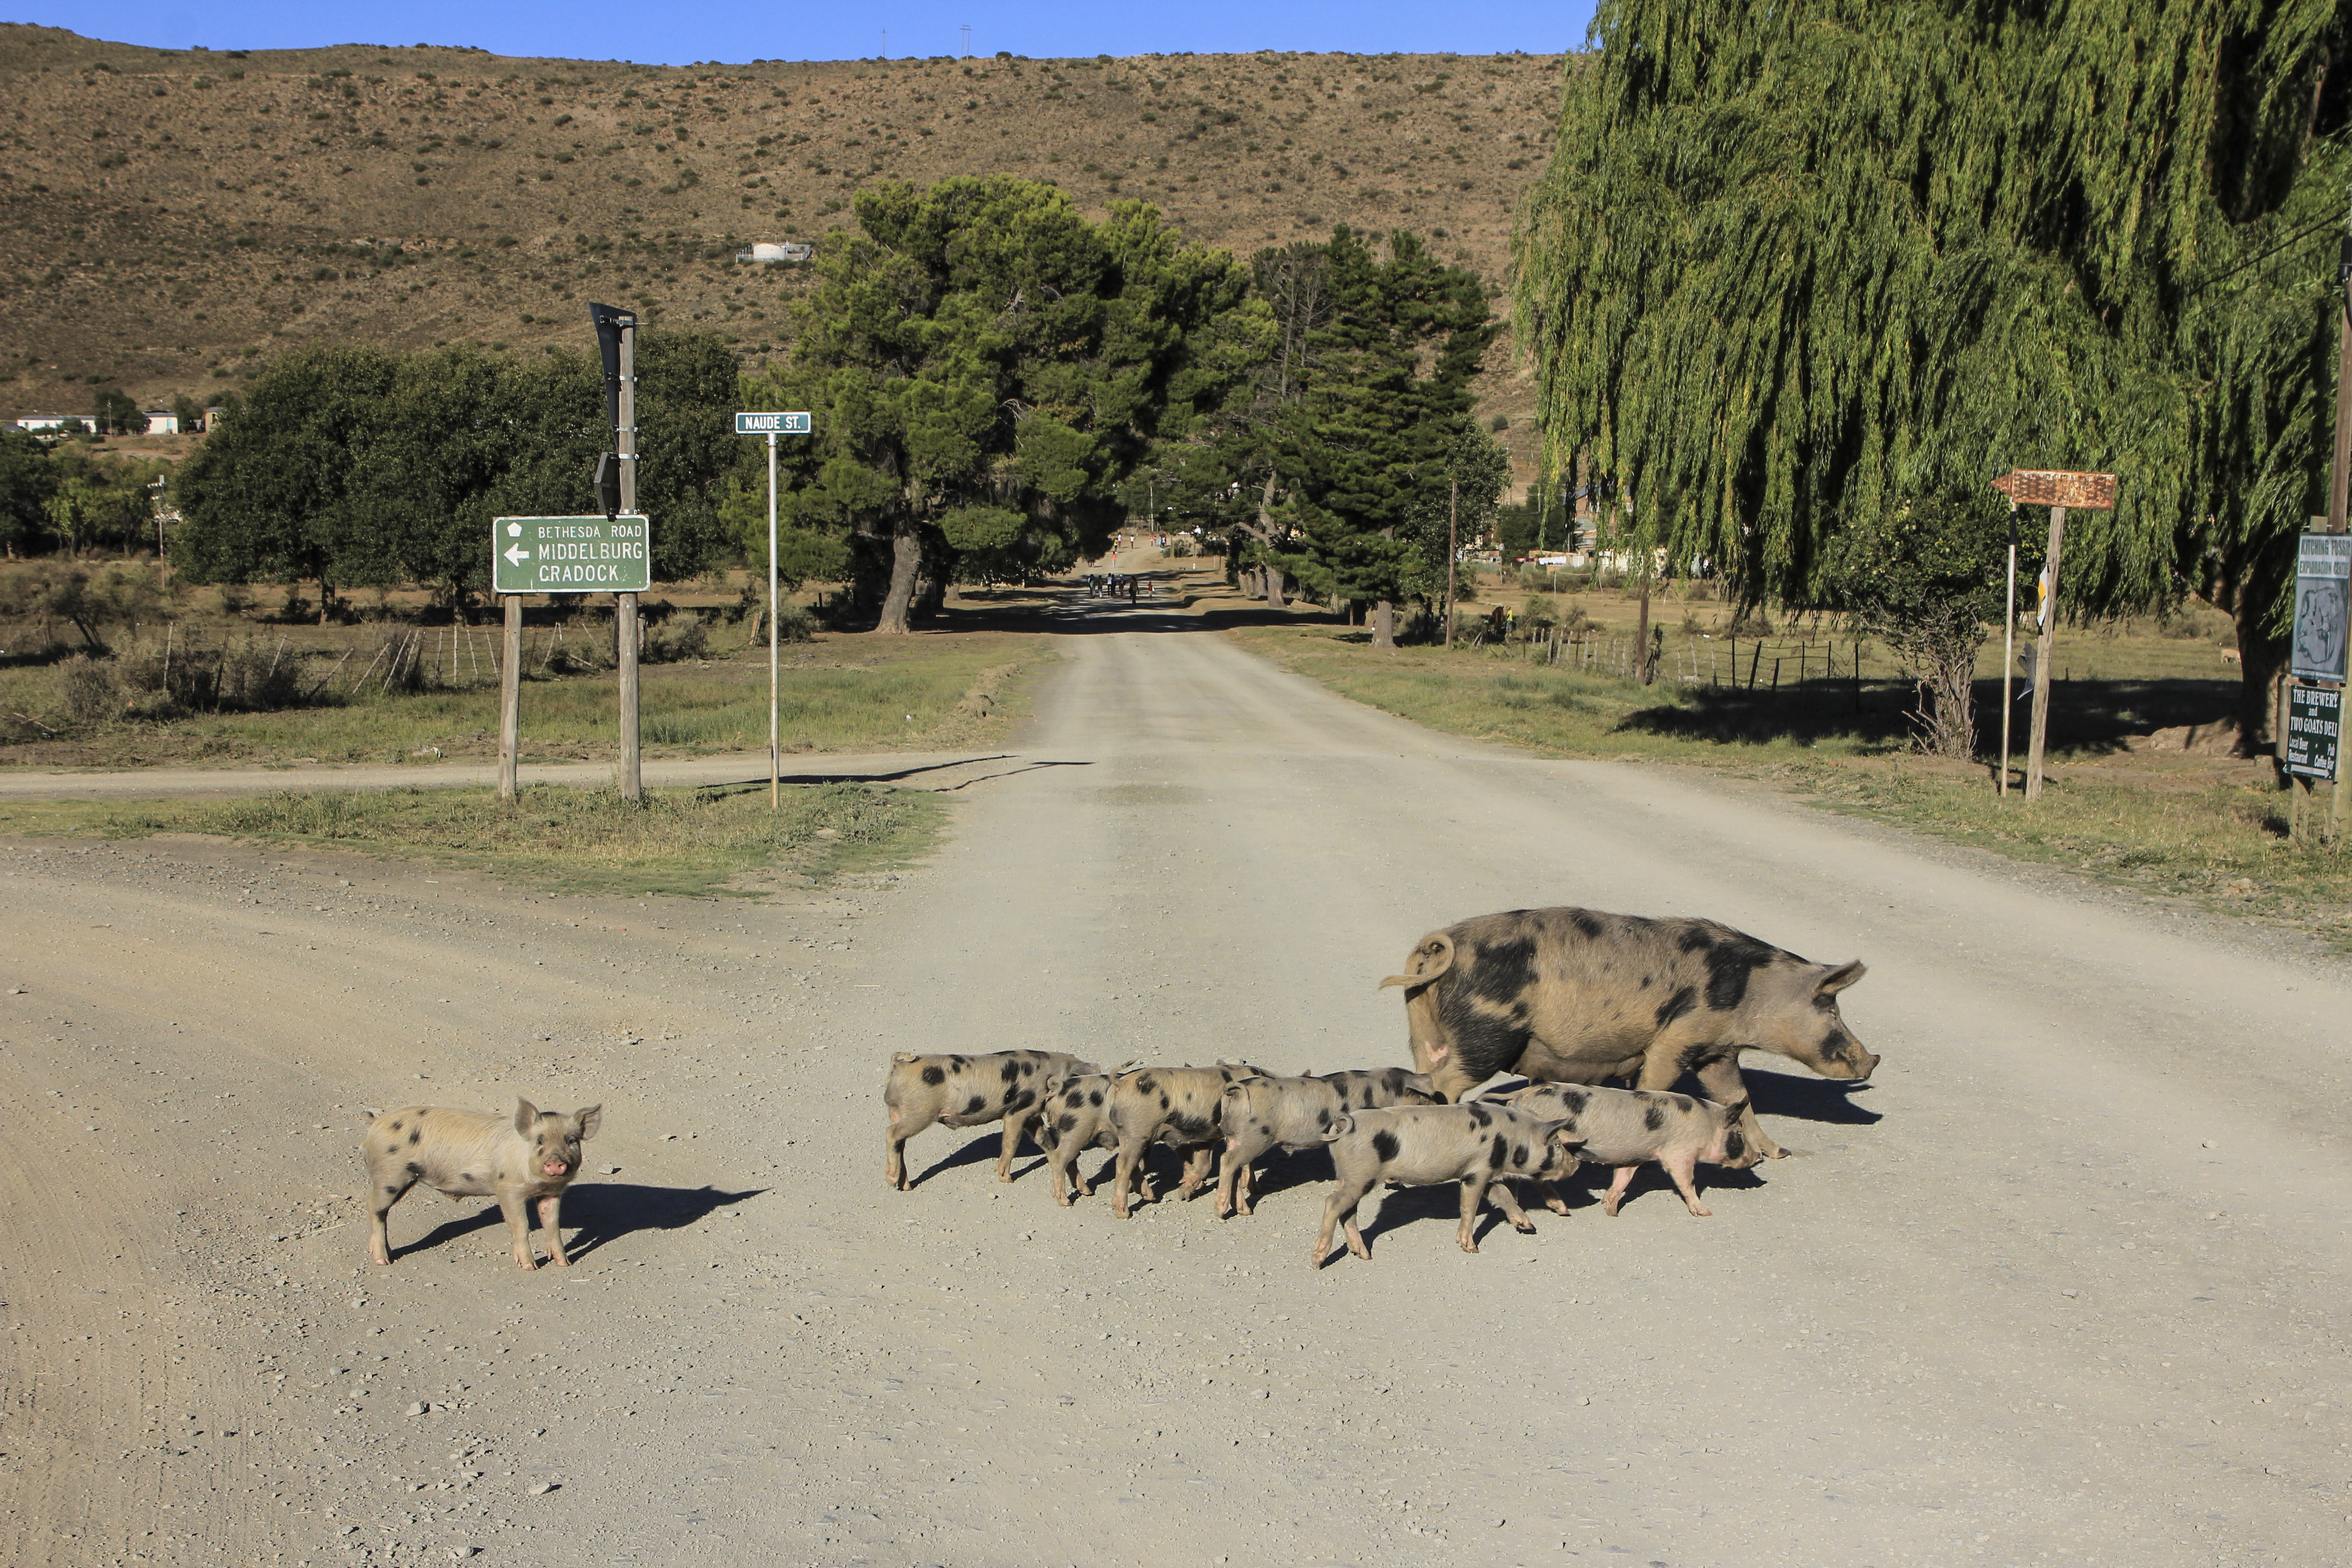 Kolbroek might refer to the pigs’ spotted hams – or is there another reason? Photographer: Chris Marais